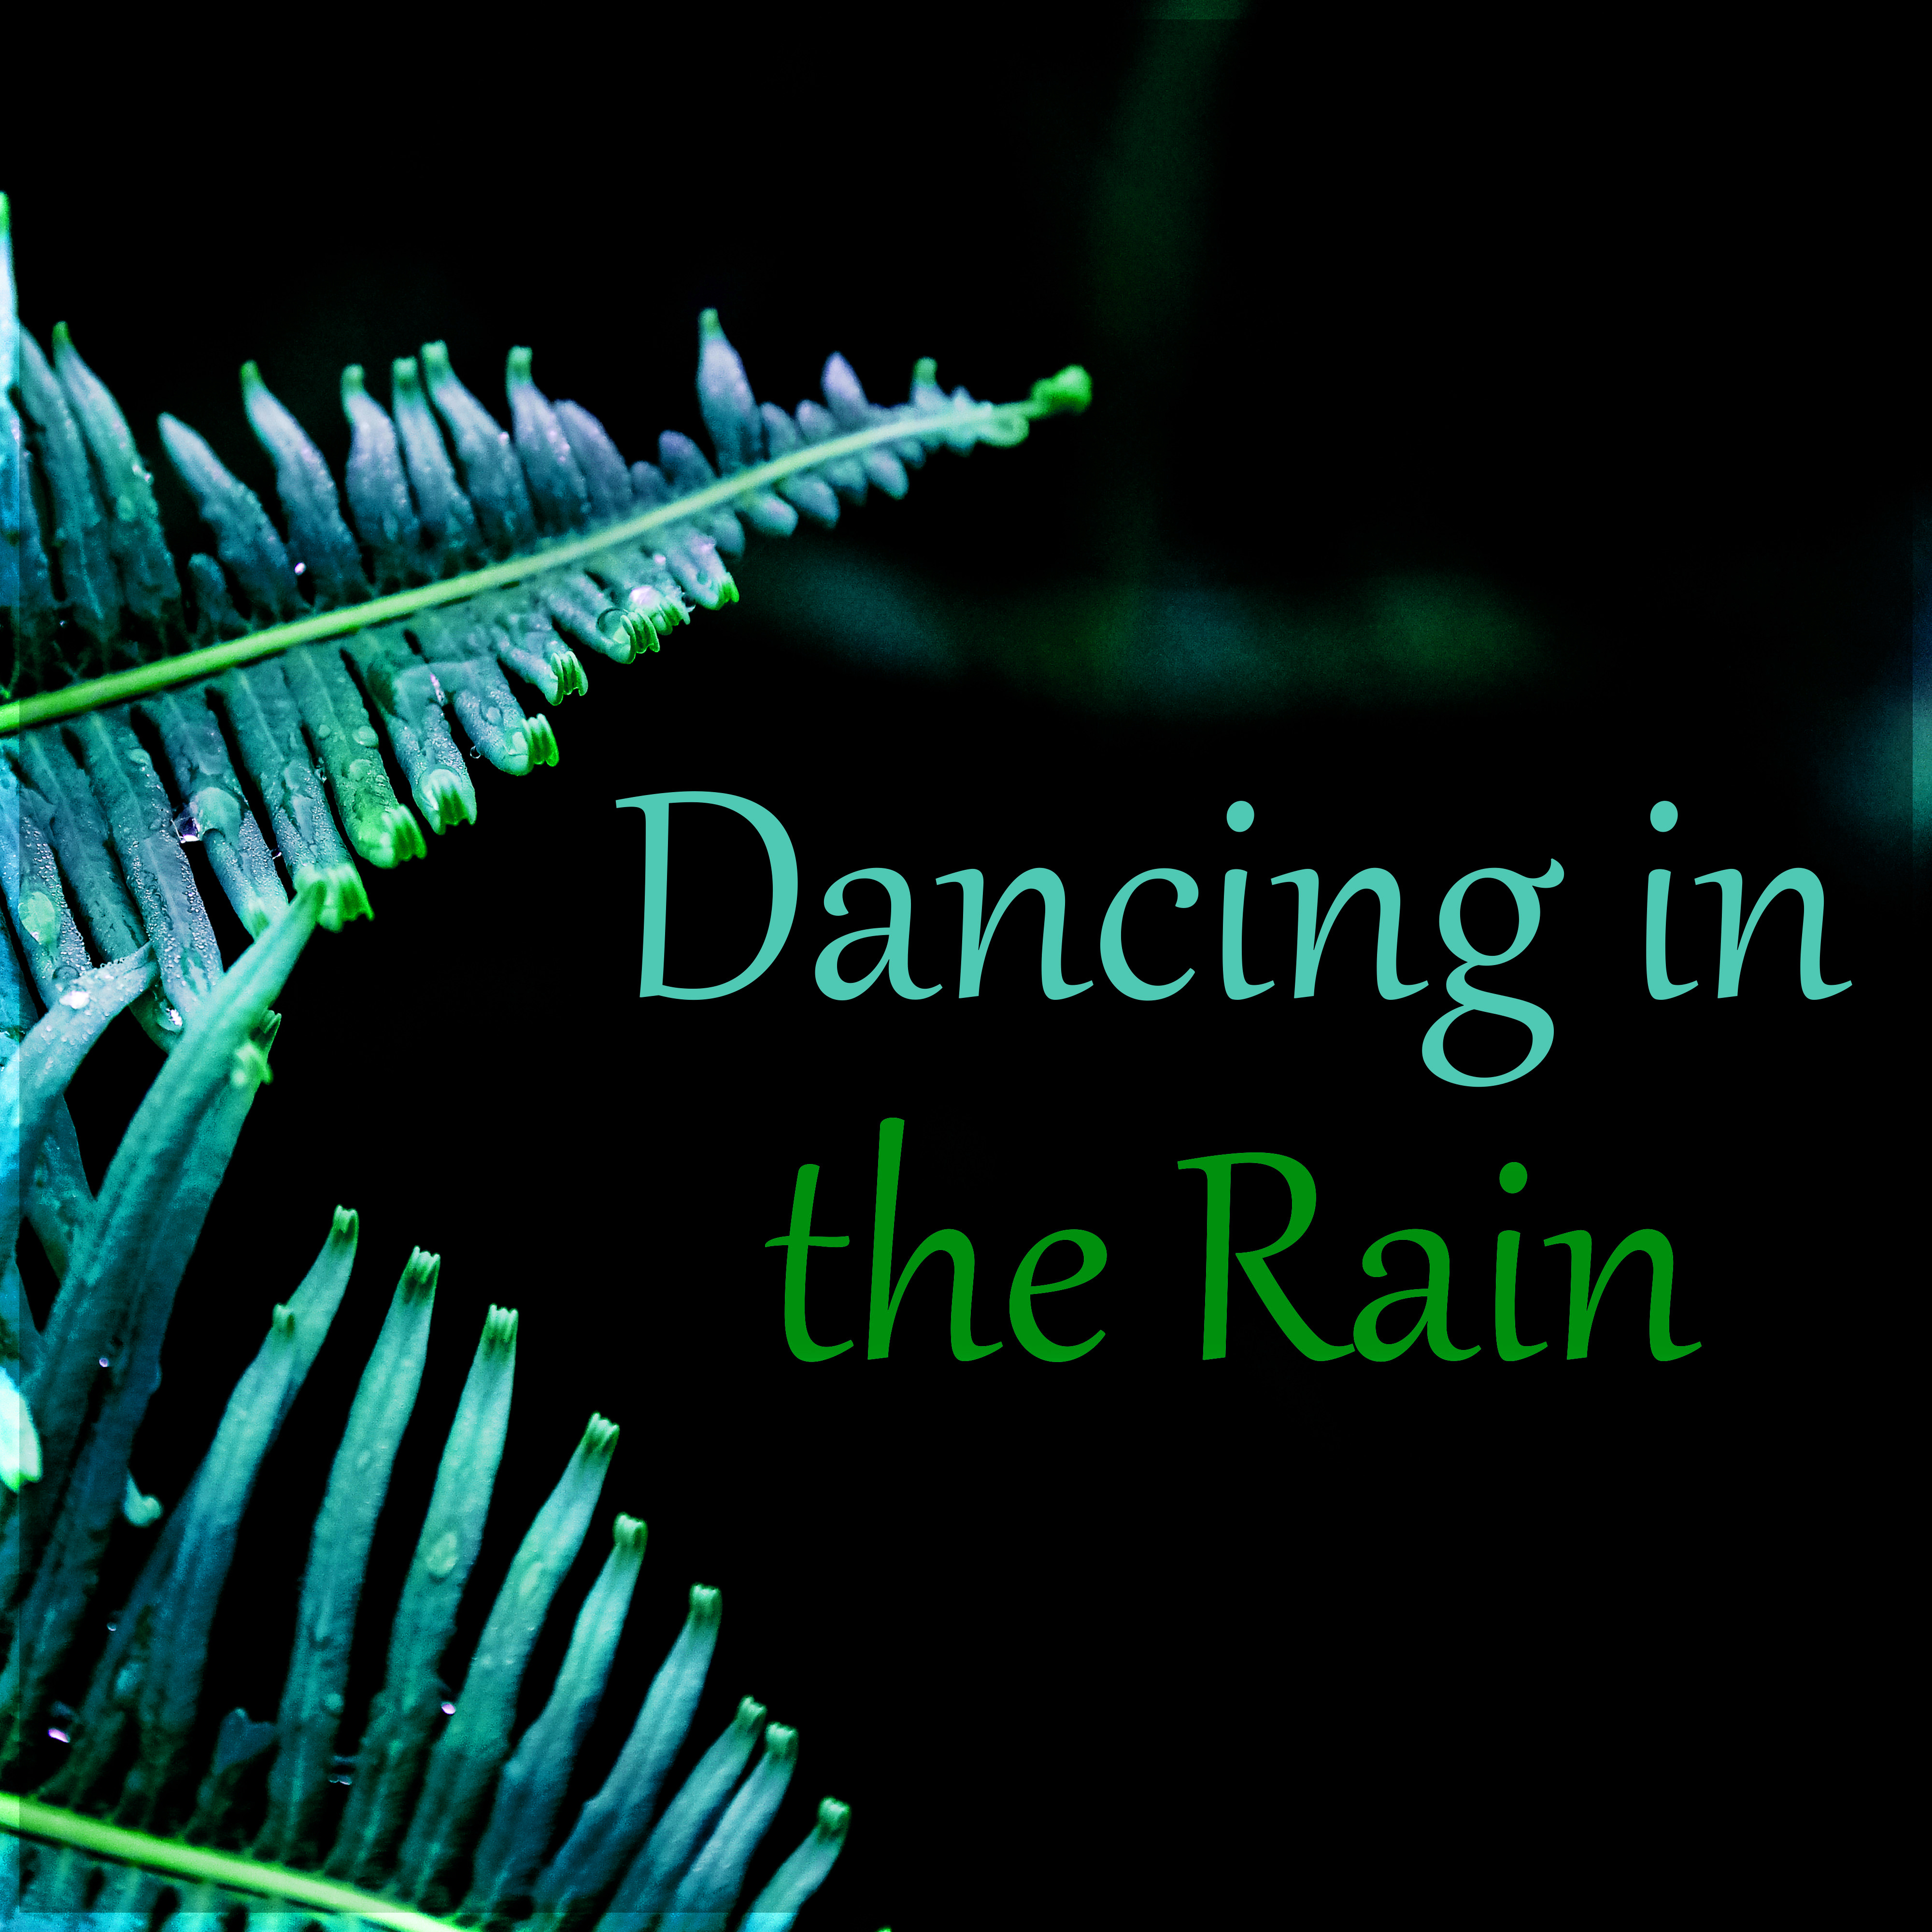 Dancing in the Rain - Ambient Music for Rest, Soothing Water Sound, Healing Sounds of Nature, Calming Rain Sounds